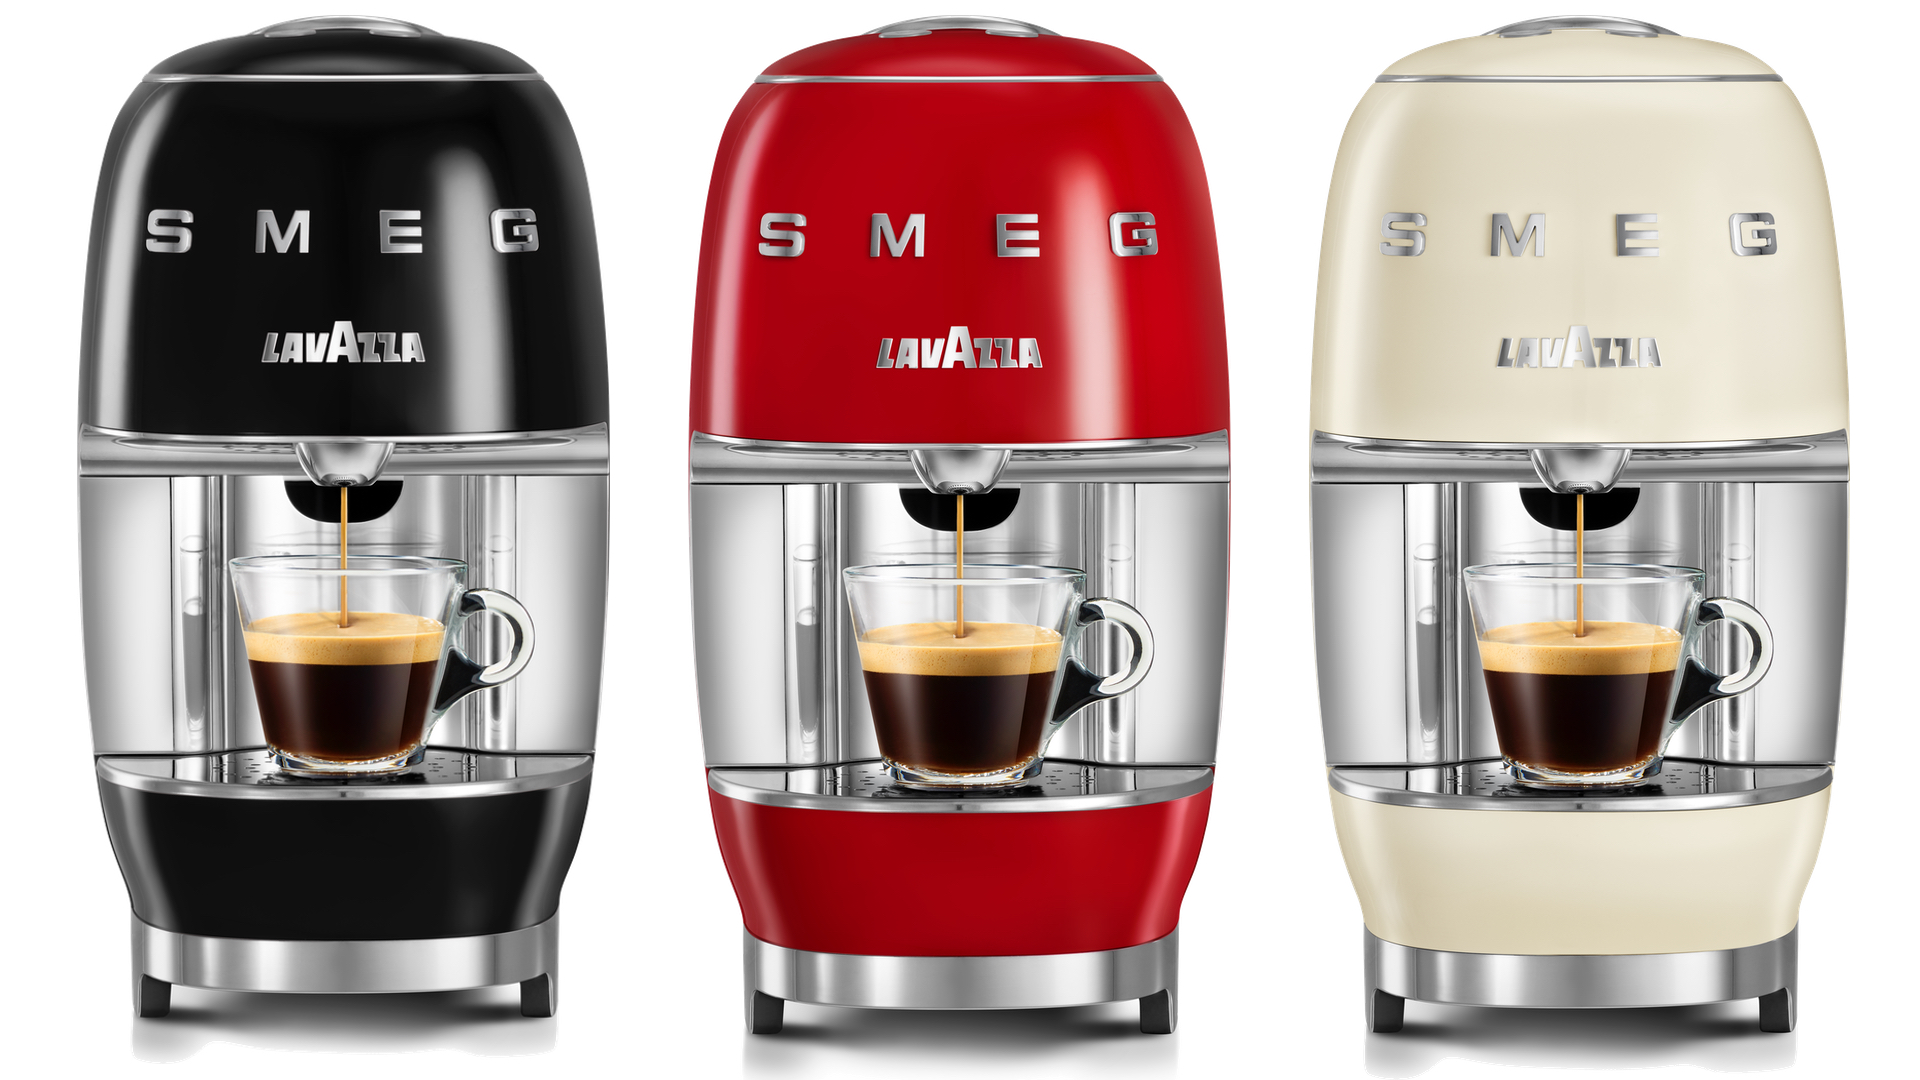 Smeg A Modo Mio Lavazza review: a sexy pod coffee machine that outdoes  Nespresso at its own capsule game